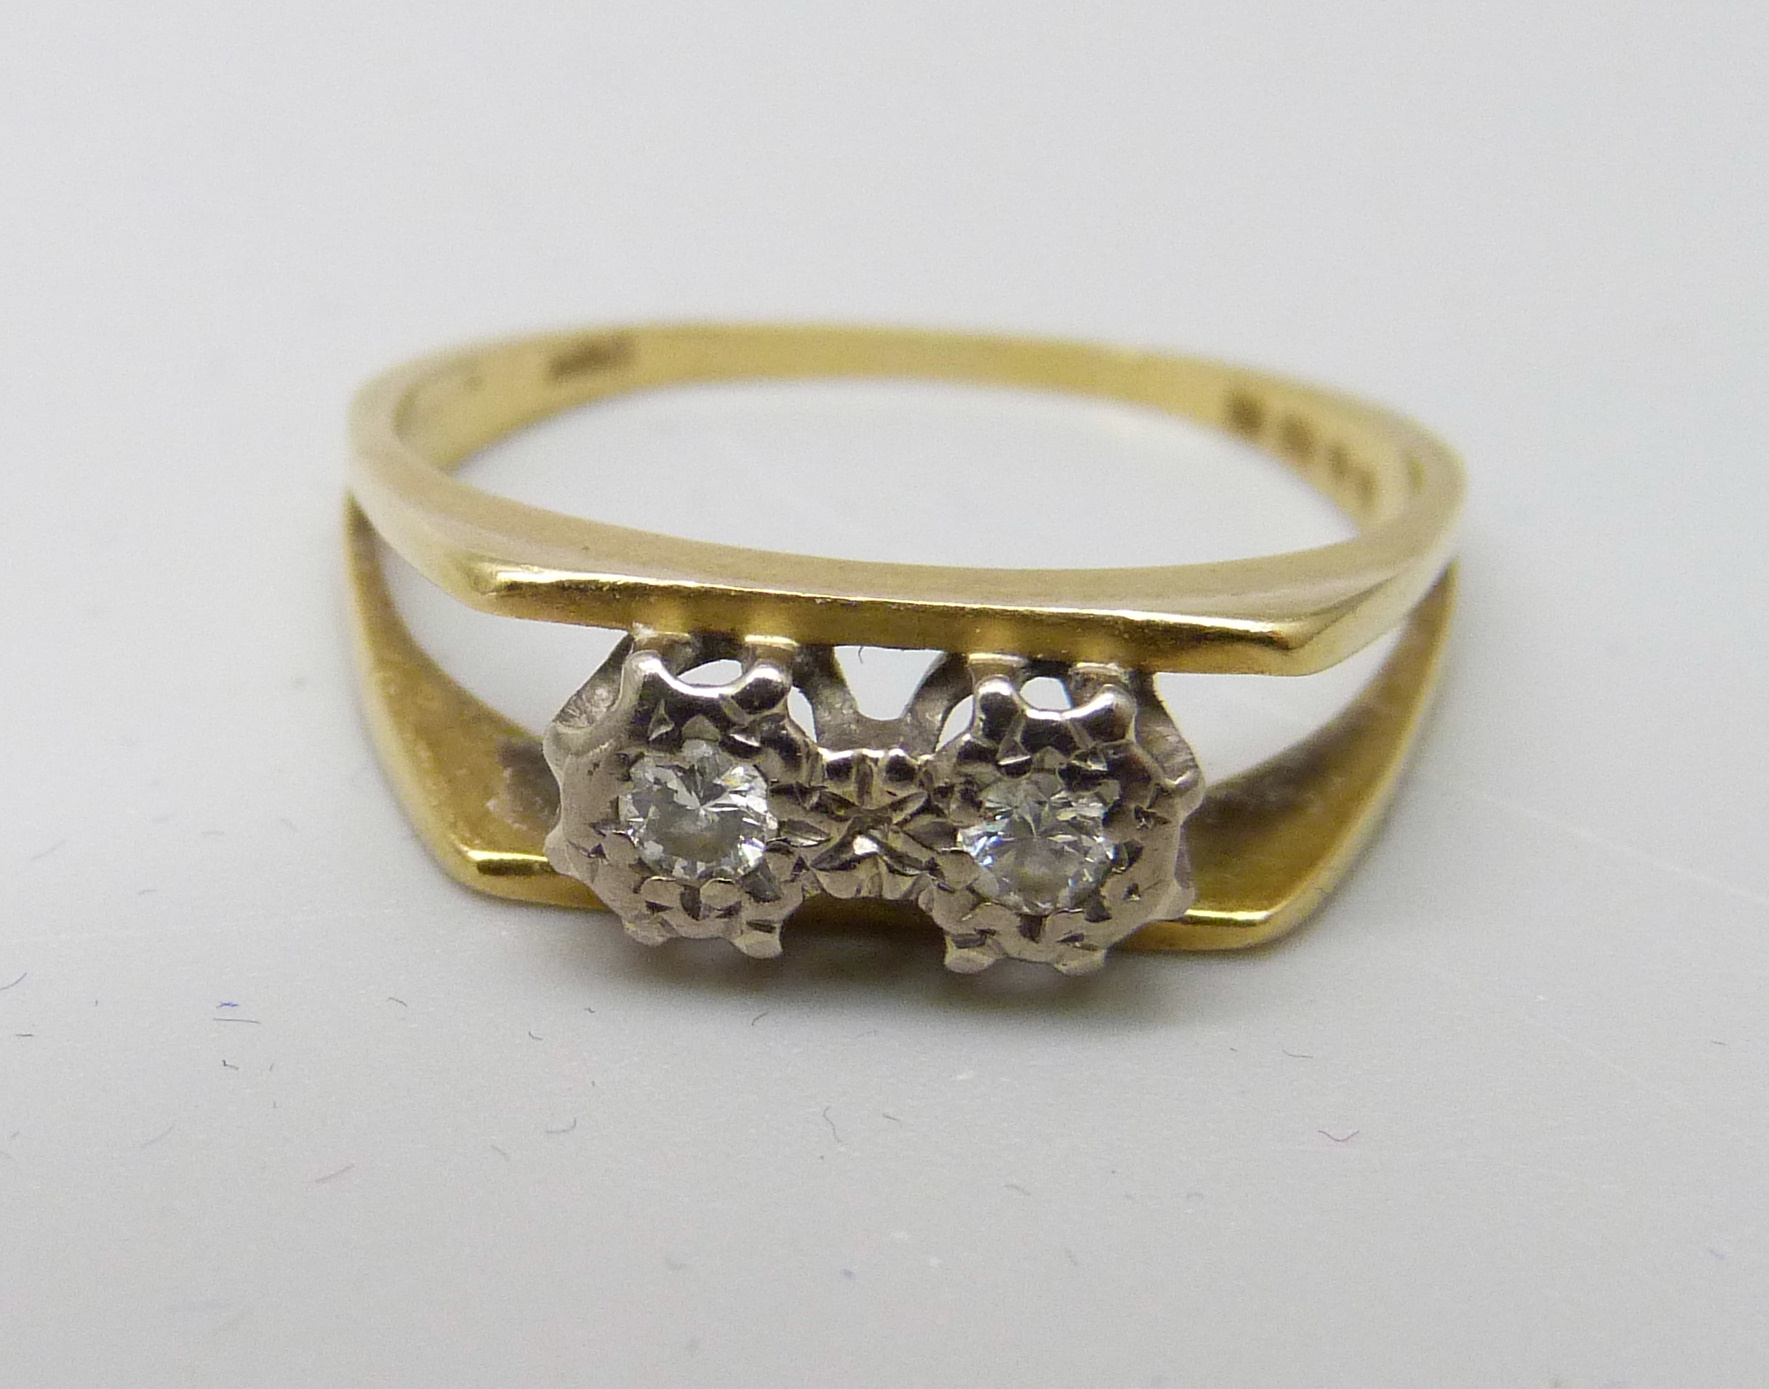 An 18ct gold and two stone diamond ring, 2.2g, J